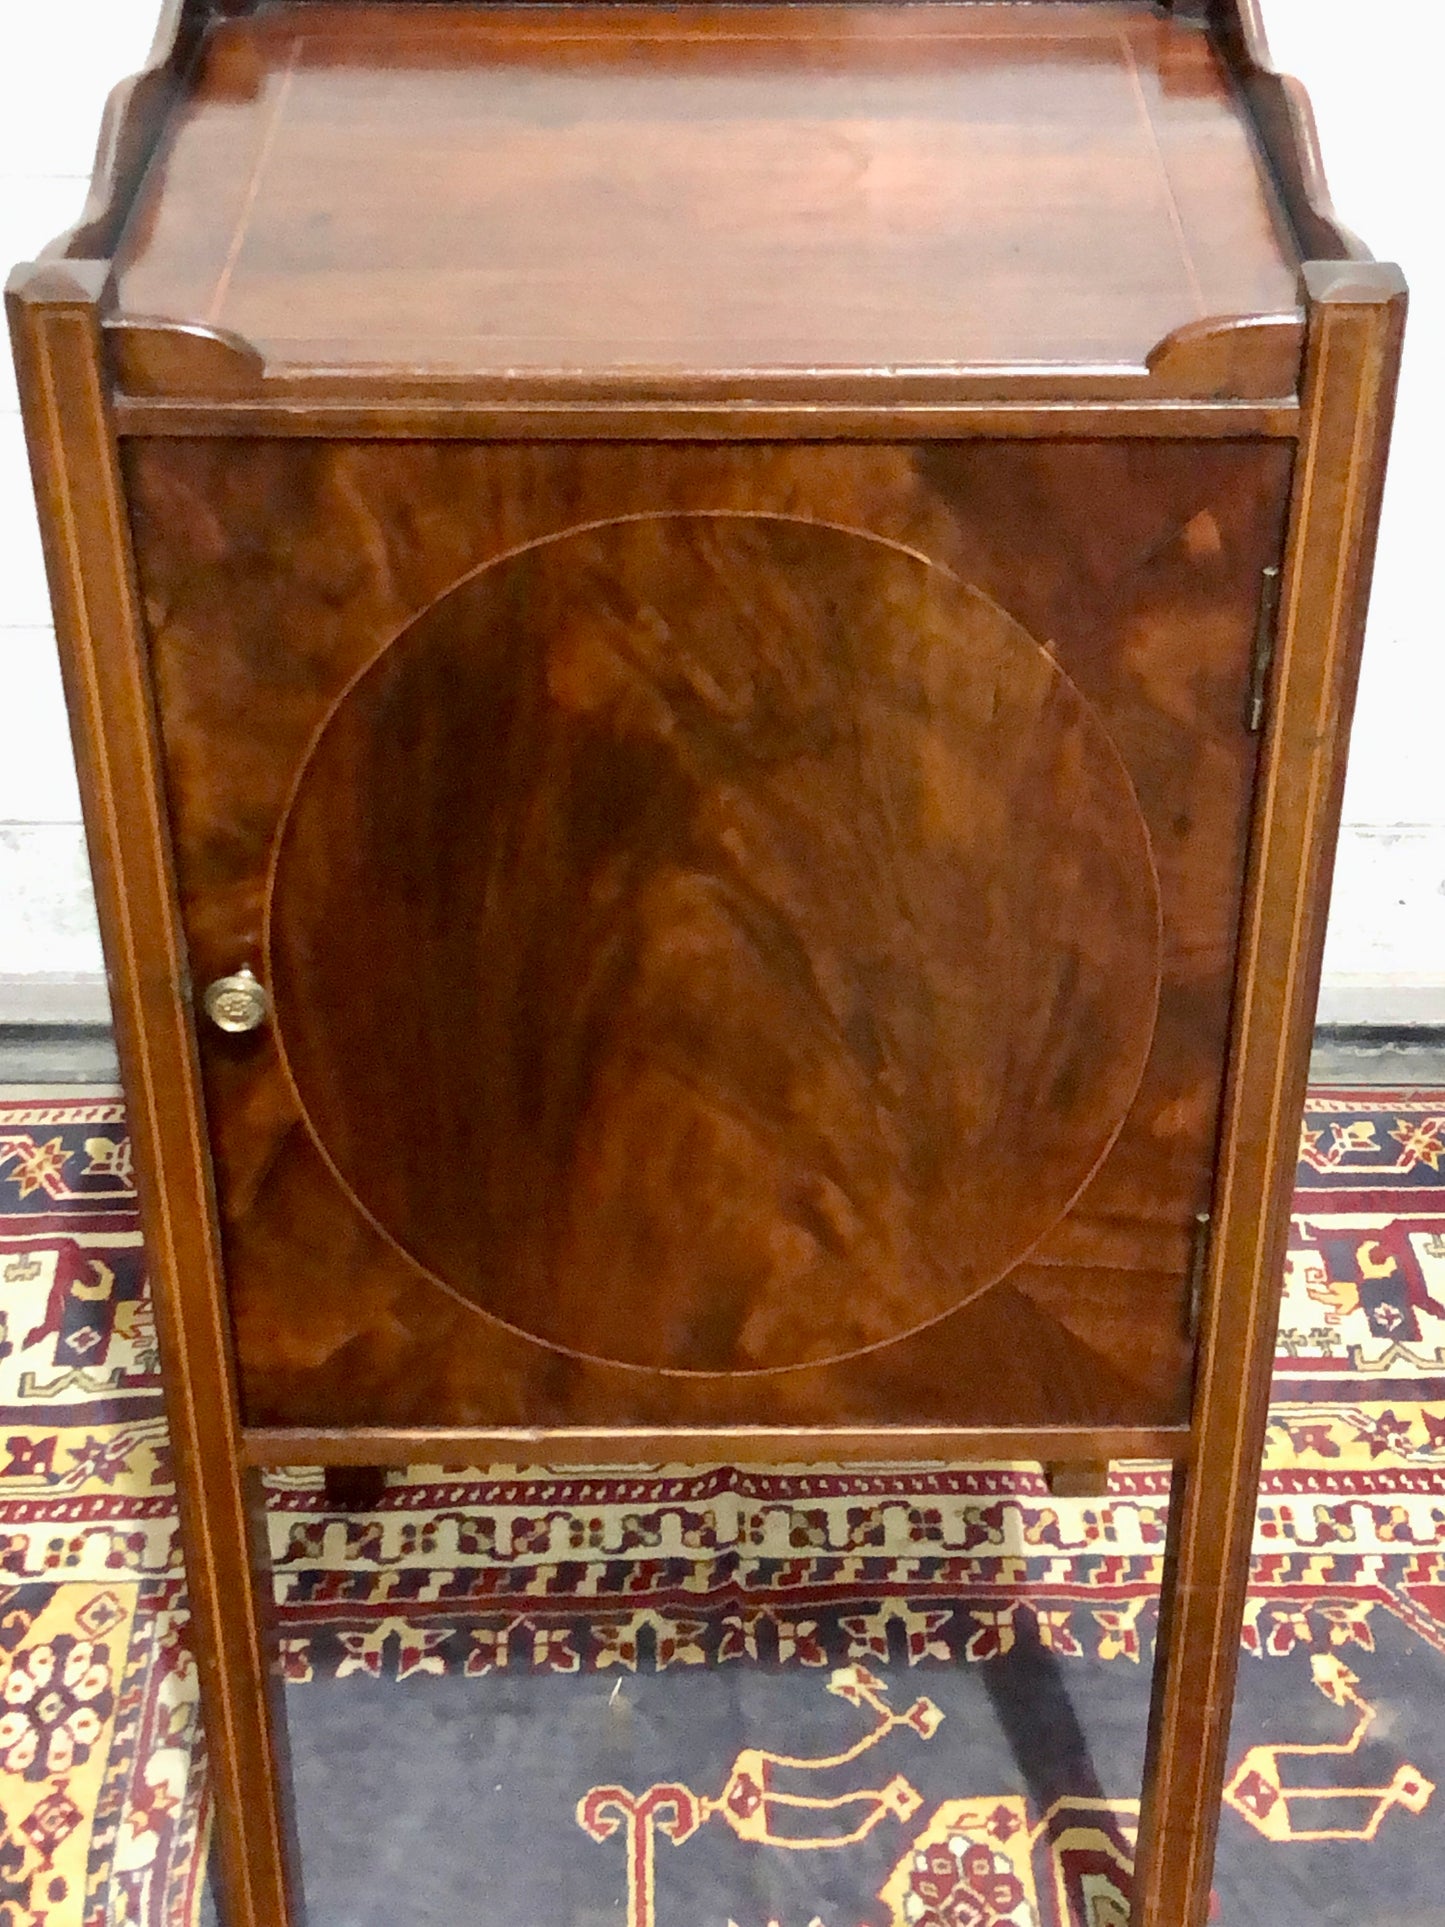 000740....Handsome Sheraton Revival Edwardian Bedside Table / Nightstand